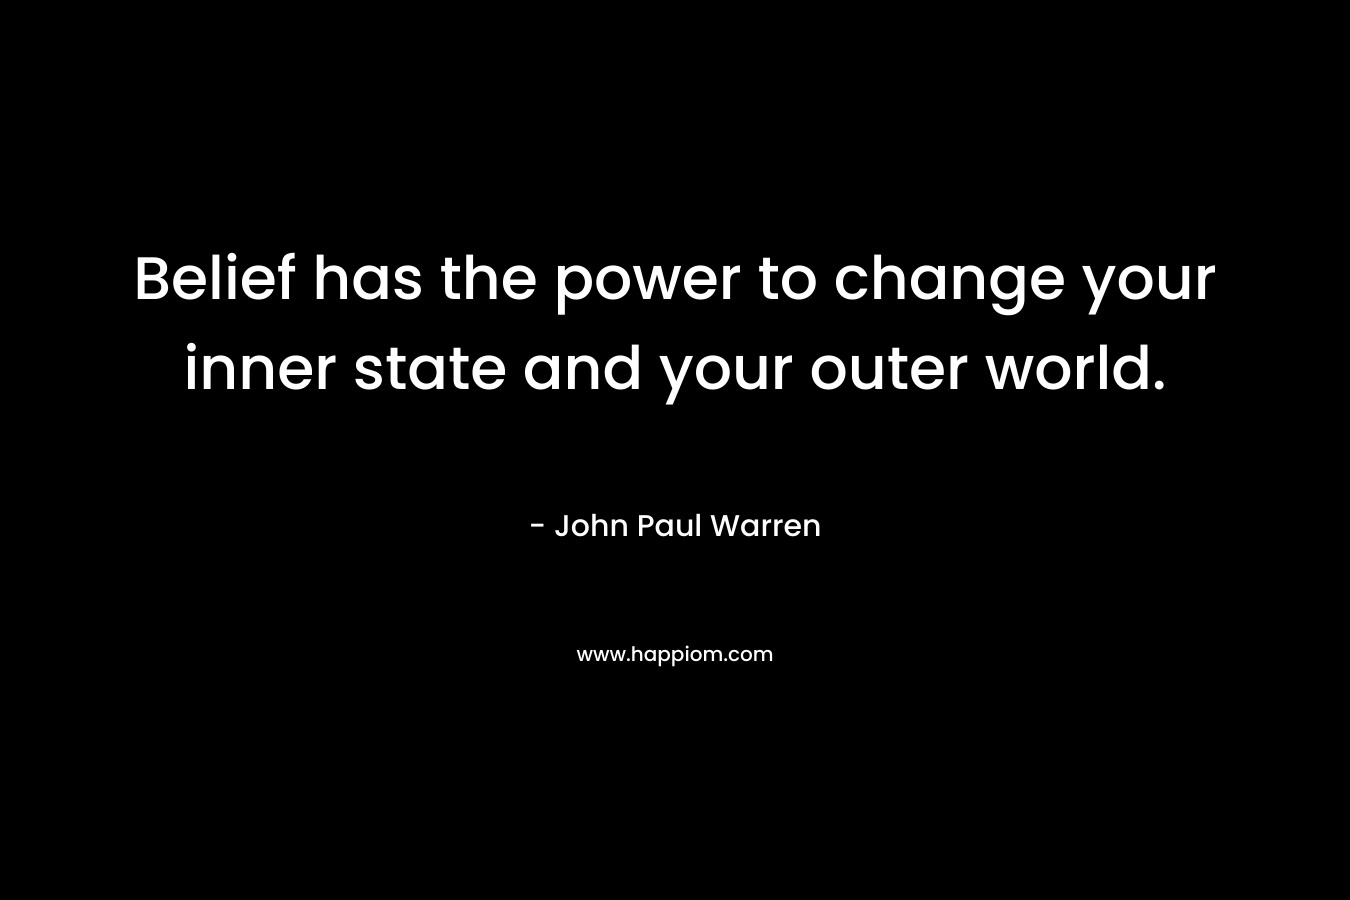 Belief has the power to change your inner state and your outer world.